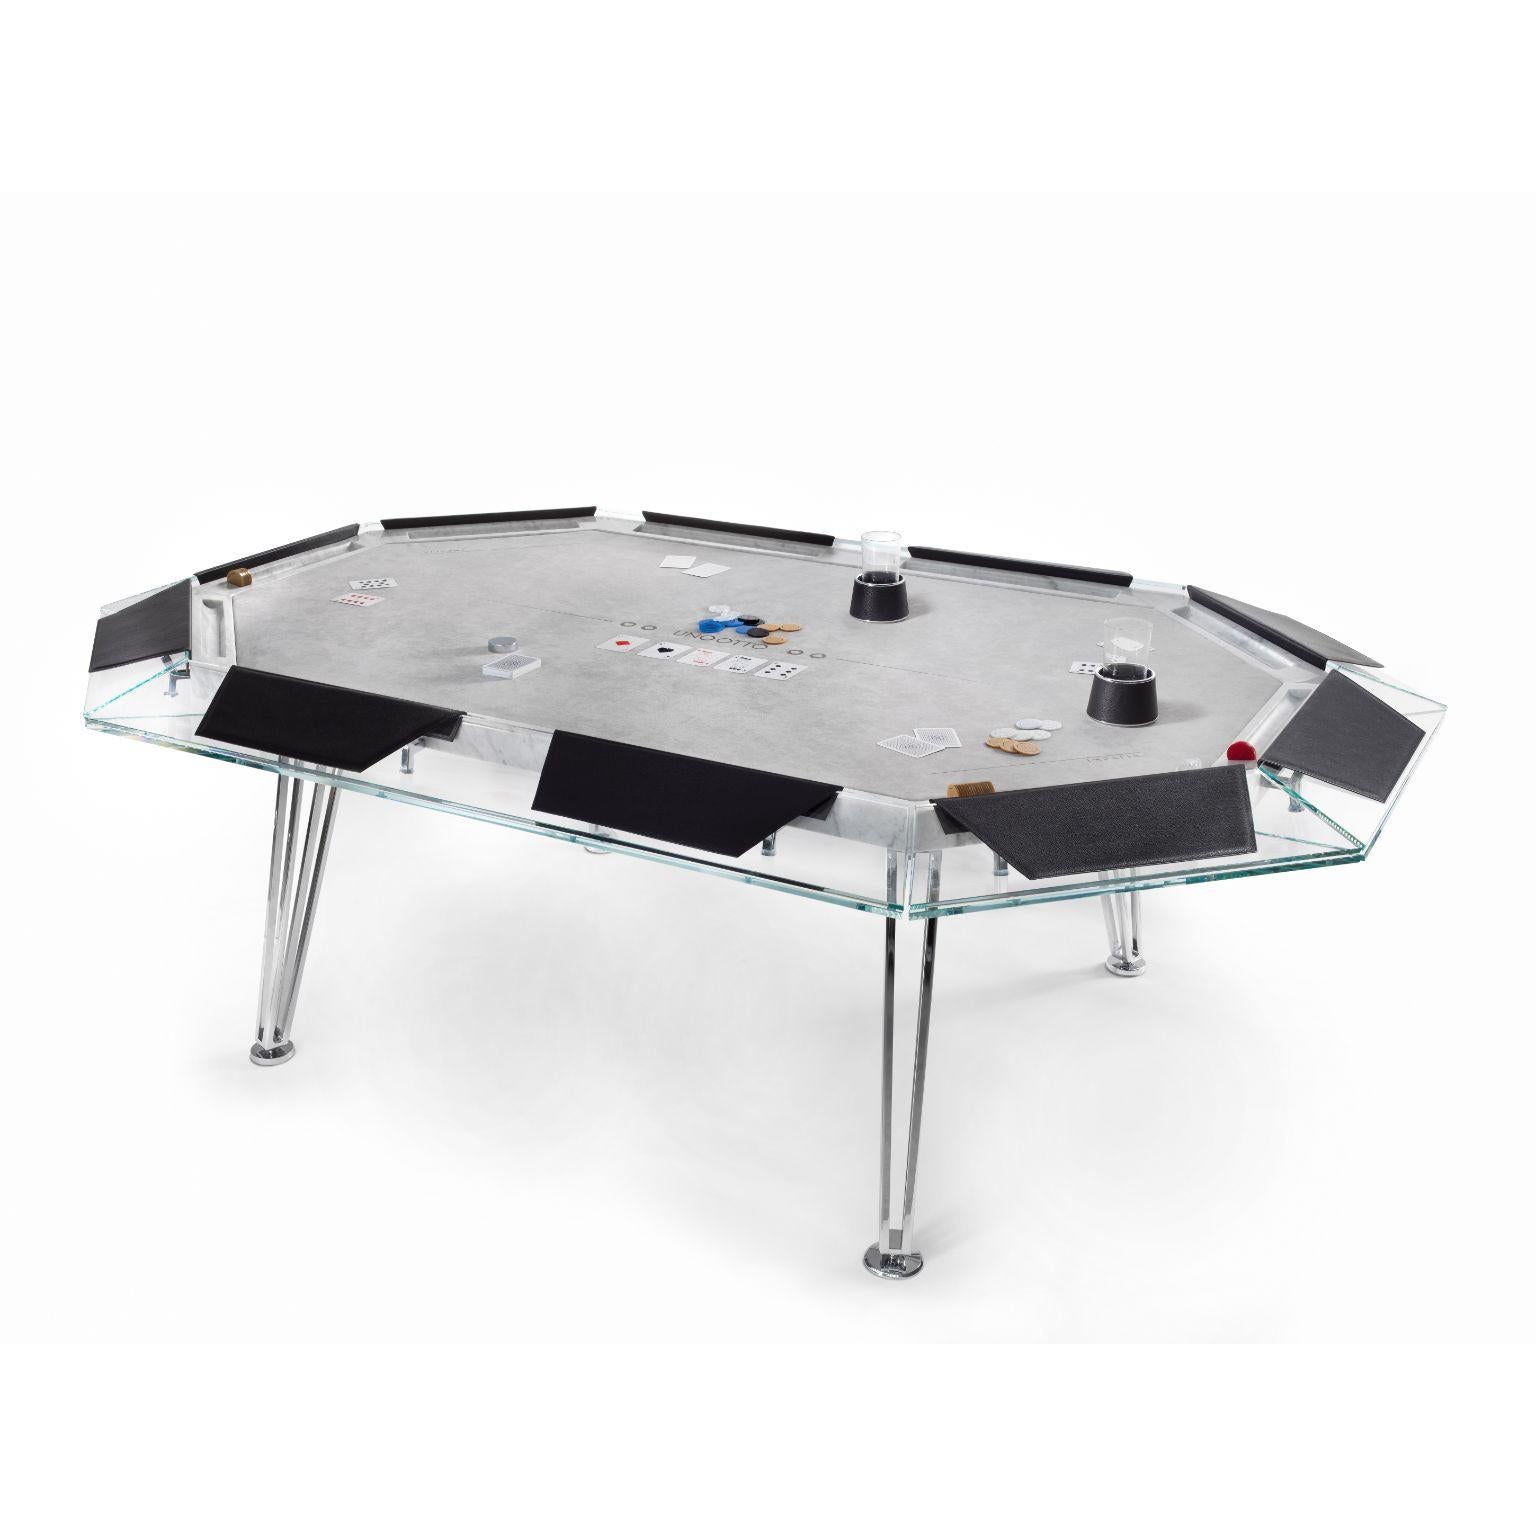 Unootto white marble 10 players poker table by Impatia
Dimensions: D 234 x W 156 x H 76 cm
Weight: 205 kg
Material: low-iron glass frame, chrome finished metal legs and components, marble top structure.
Also available: 8 payers version and